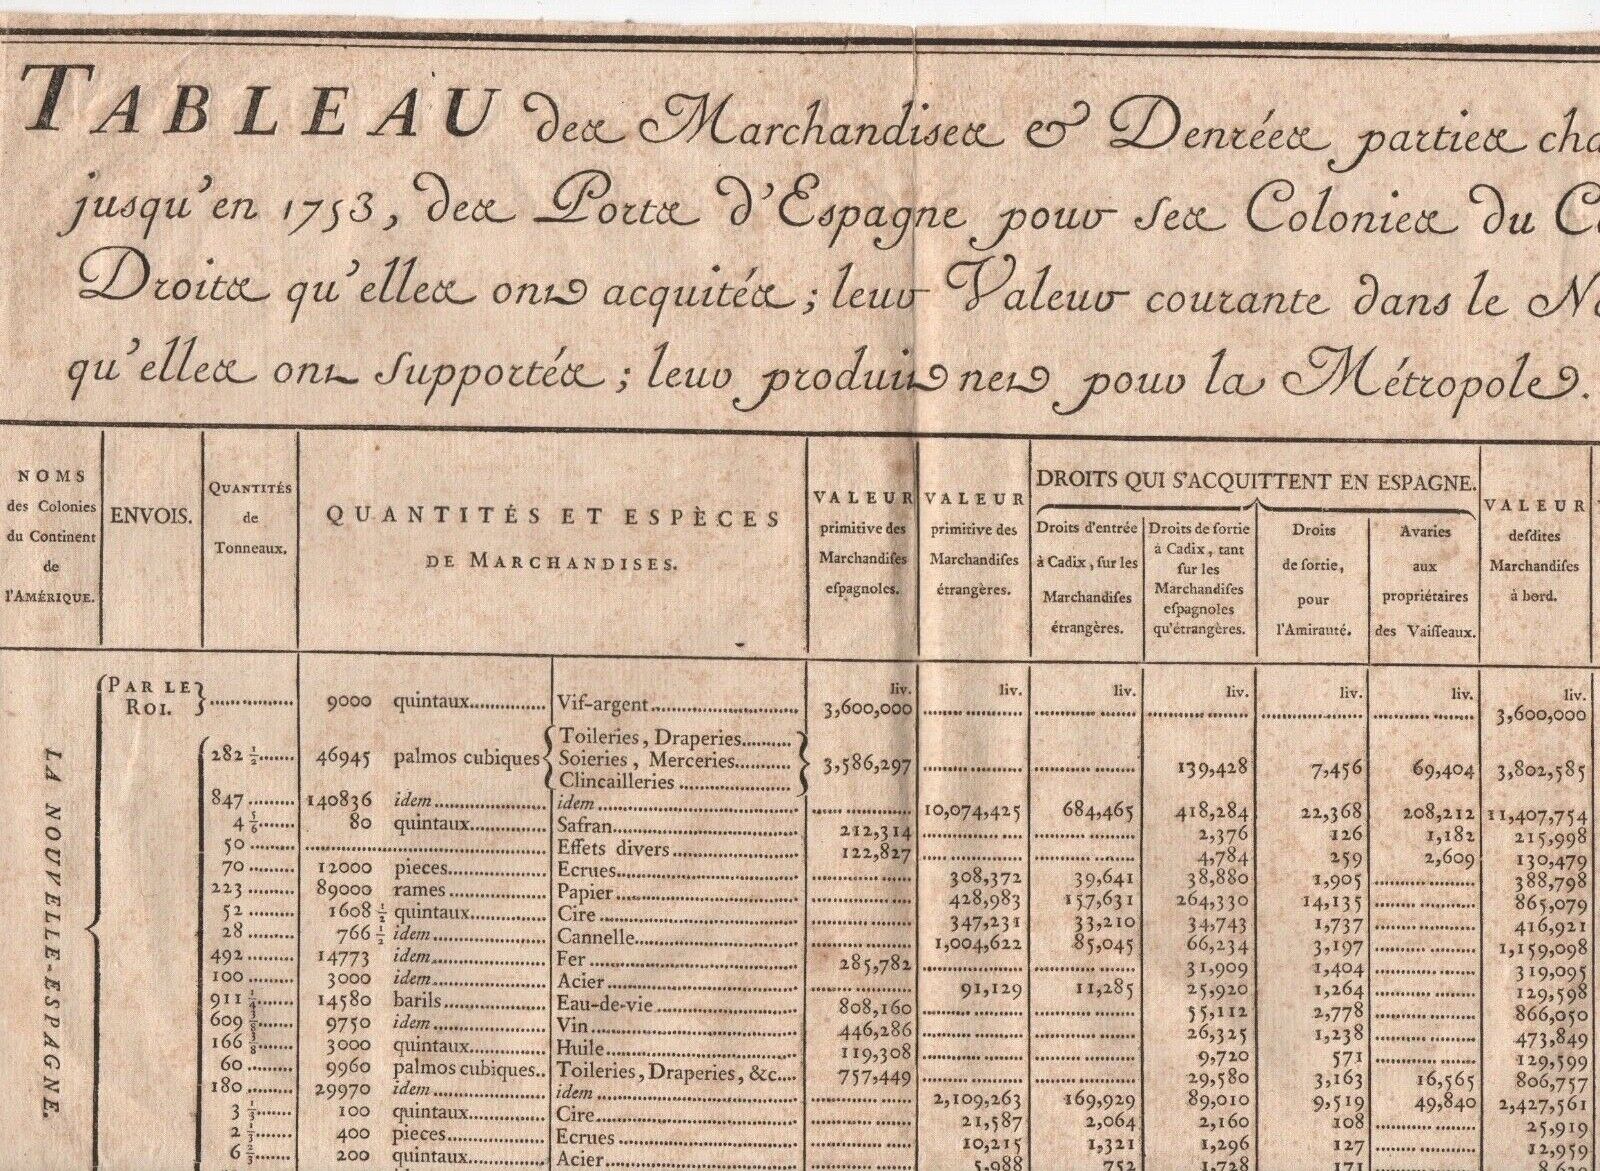  1750s Printed Shipping Table of Merchandise sent to American Colonies by France